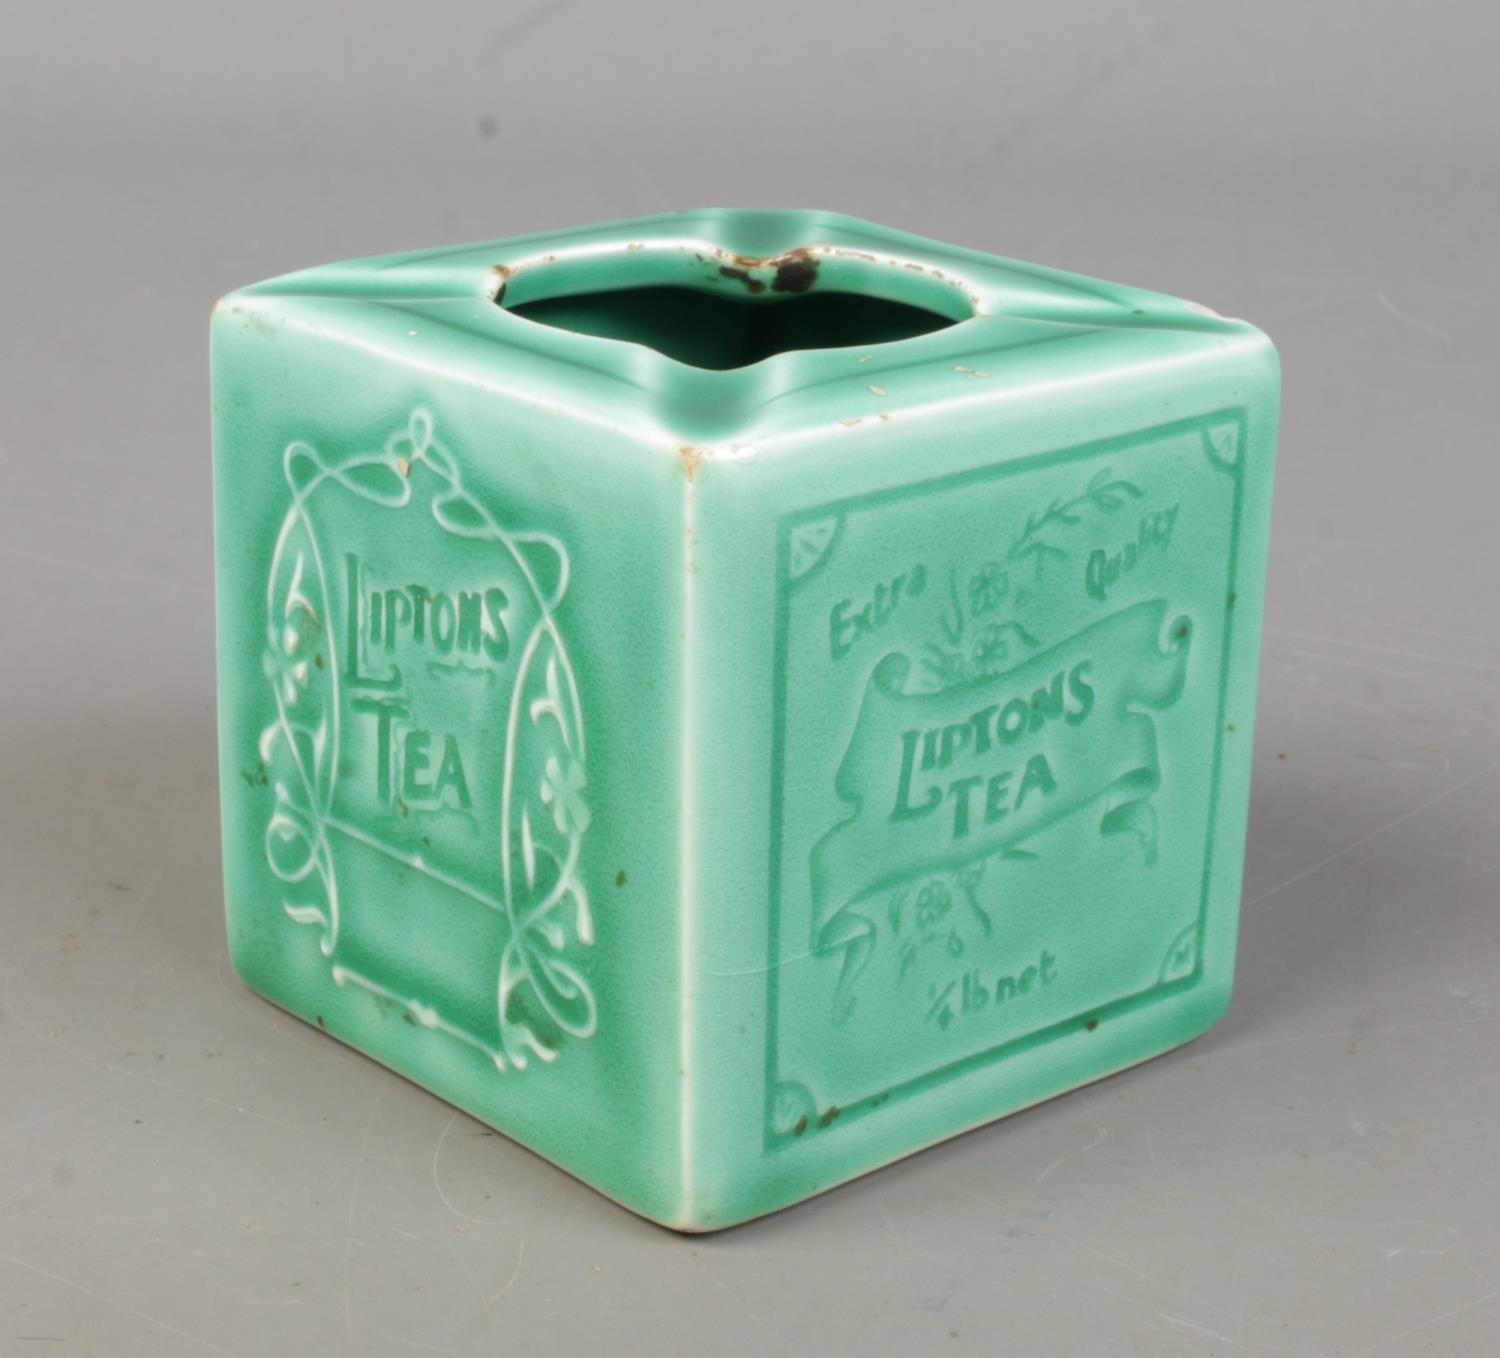 A vintage French Liptons Tea cigarette tray of cube form.